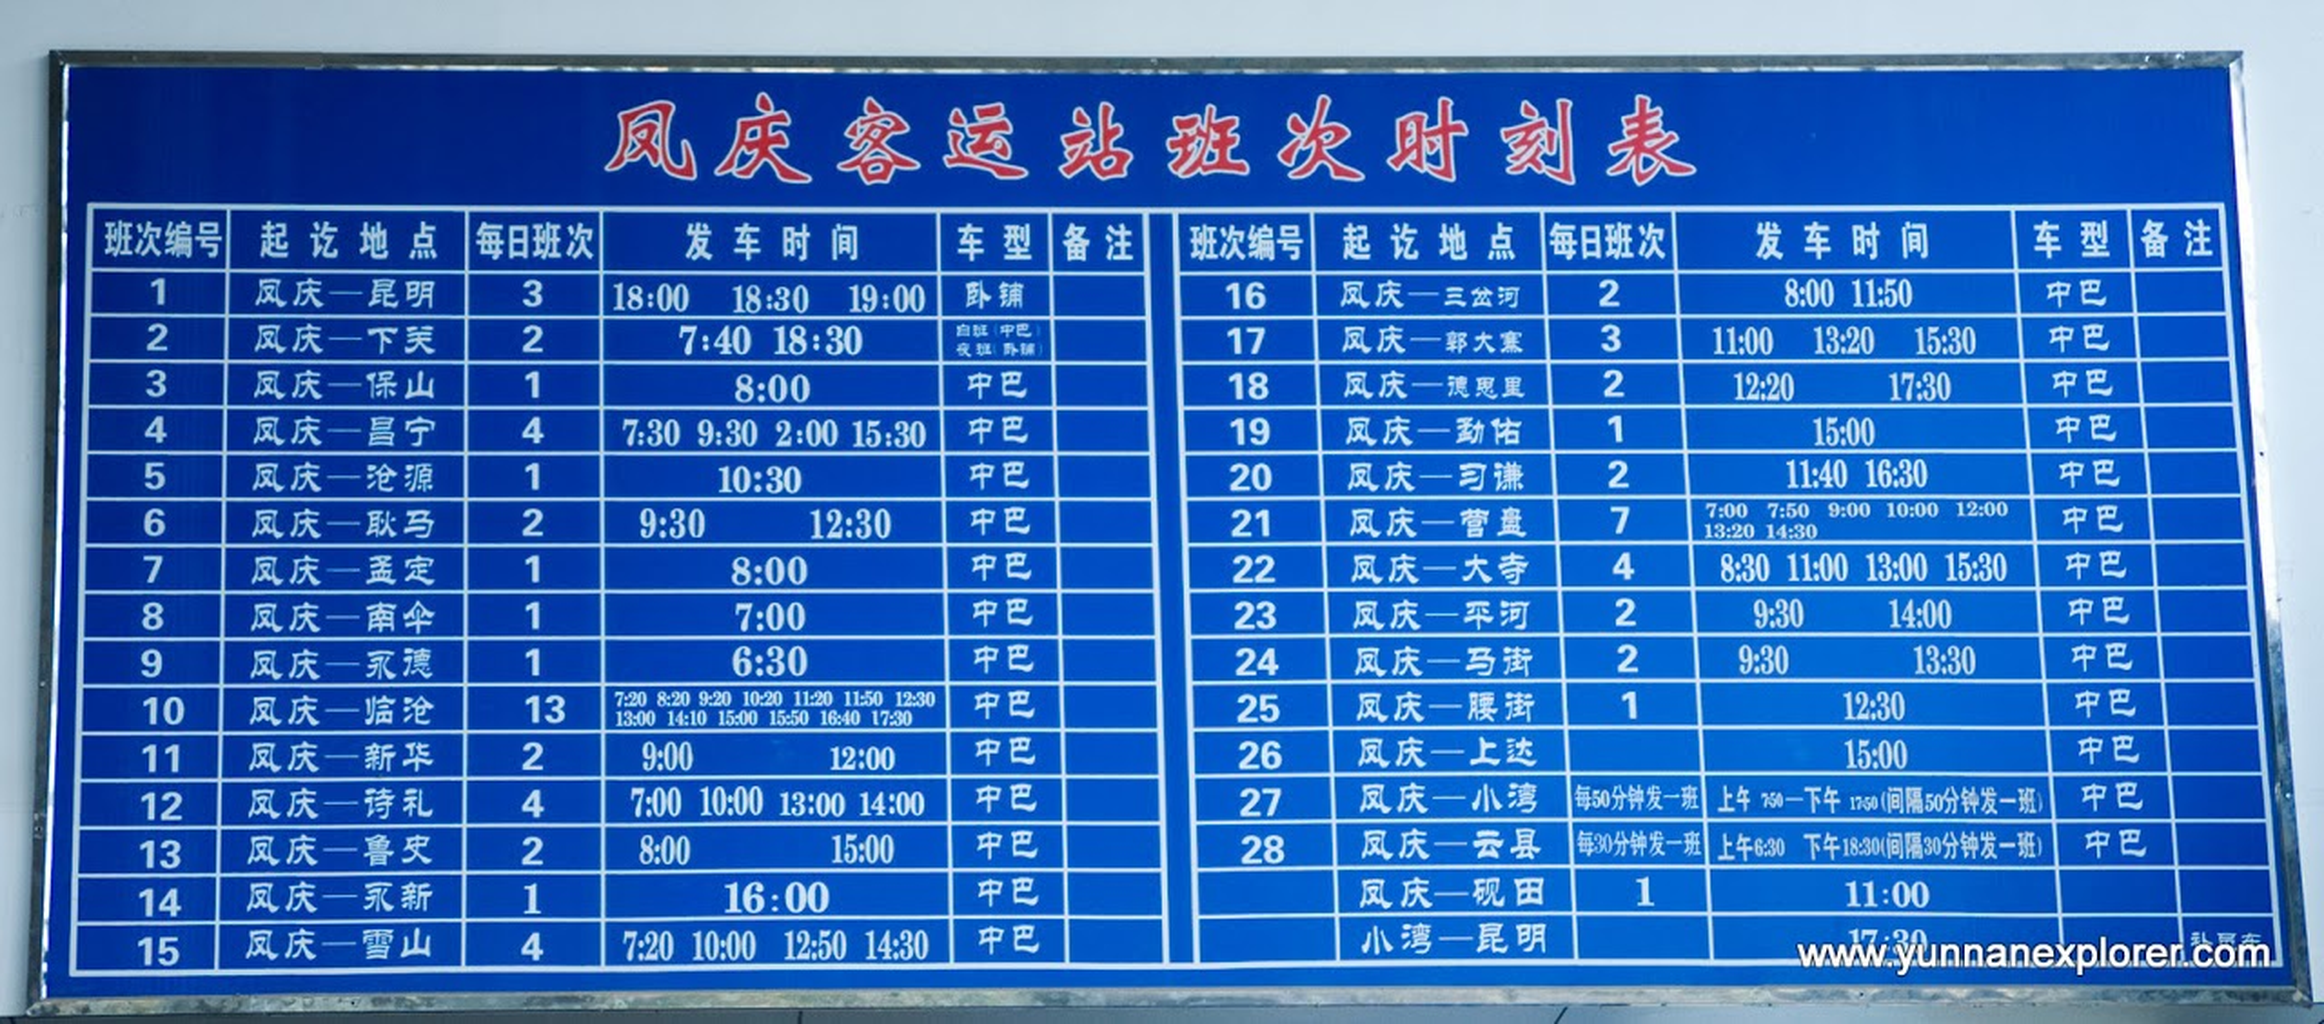 Picture: Fengqing is a small town and the bus station has not really that many departures a day. The main town to reach is Yunxian from which the connections are much better. There are plenty of hotels around the bus station. 